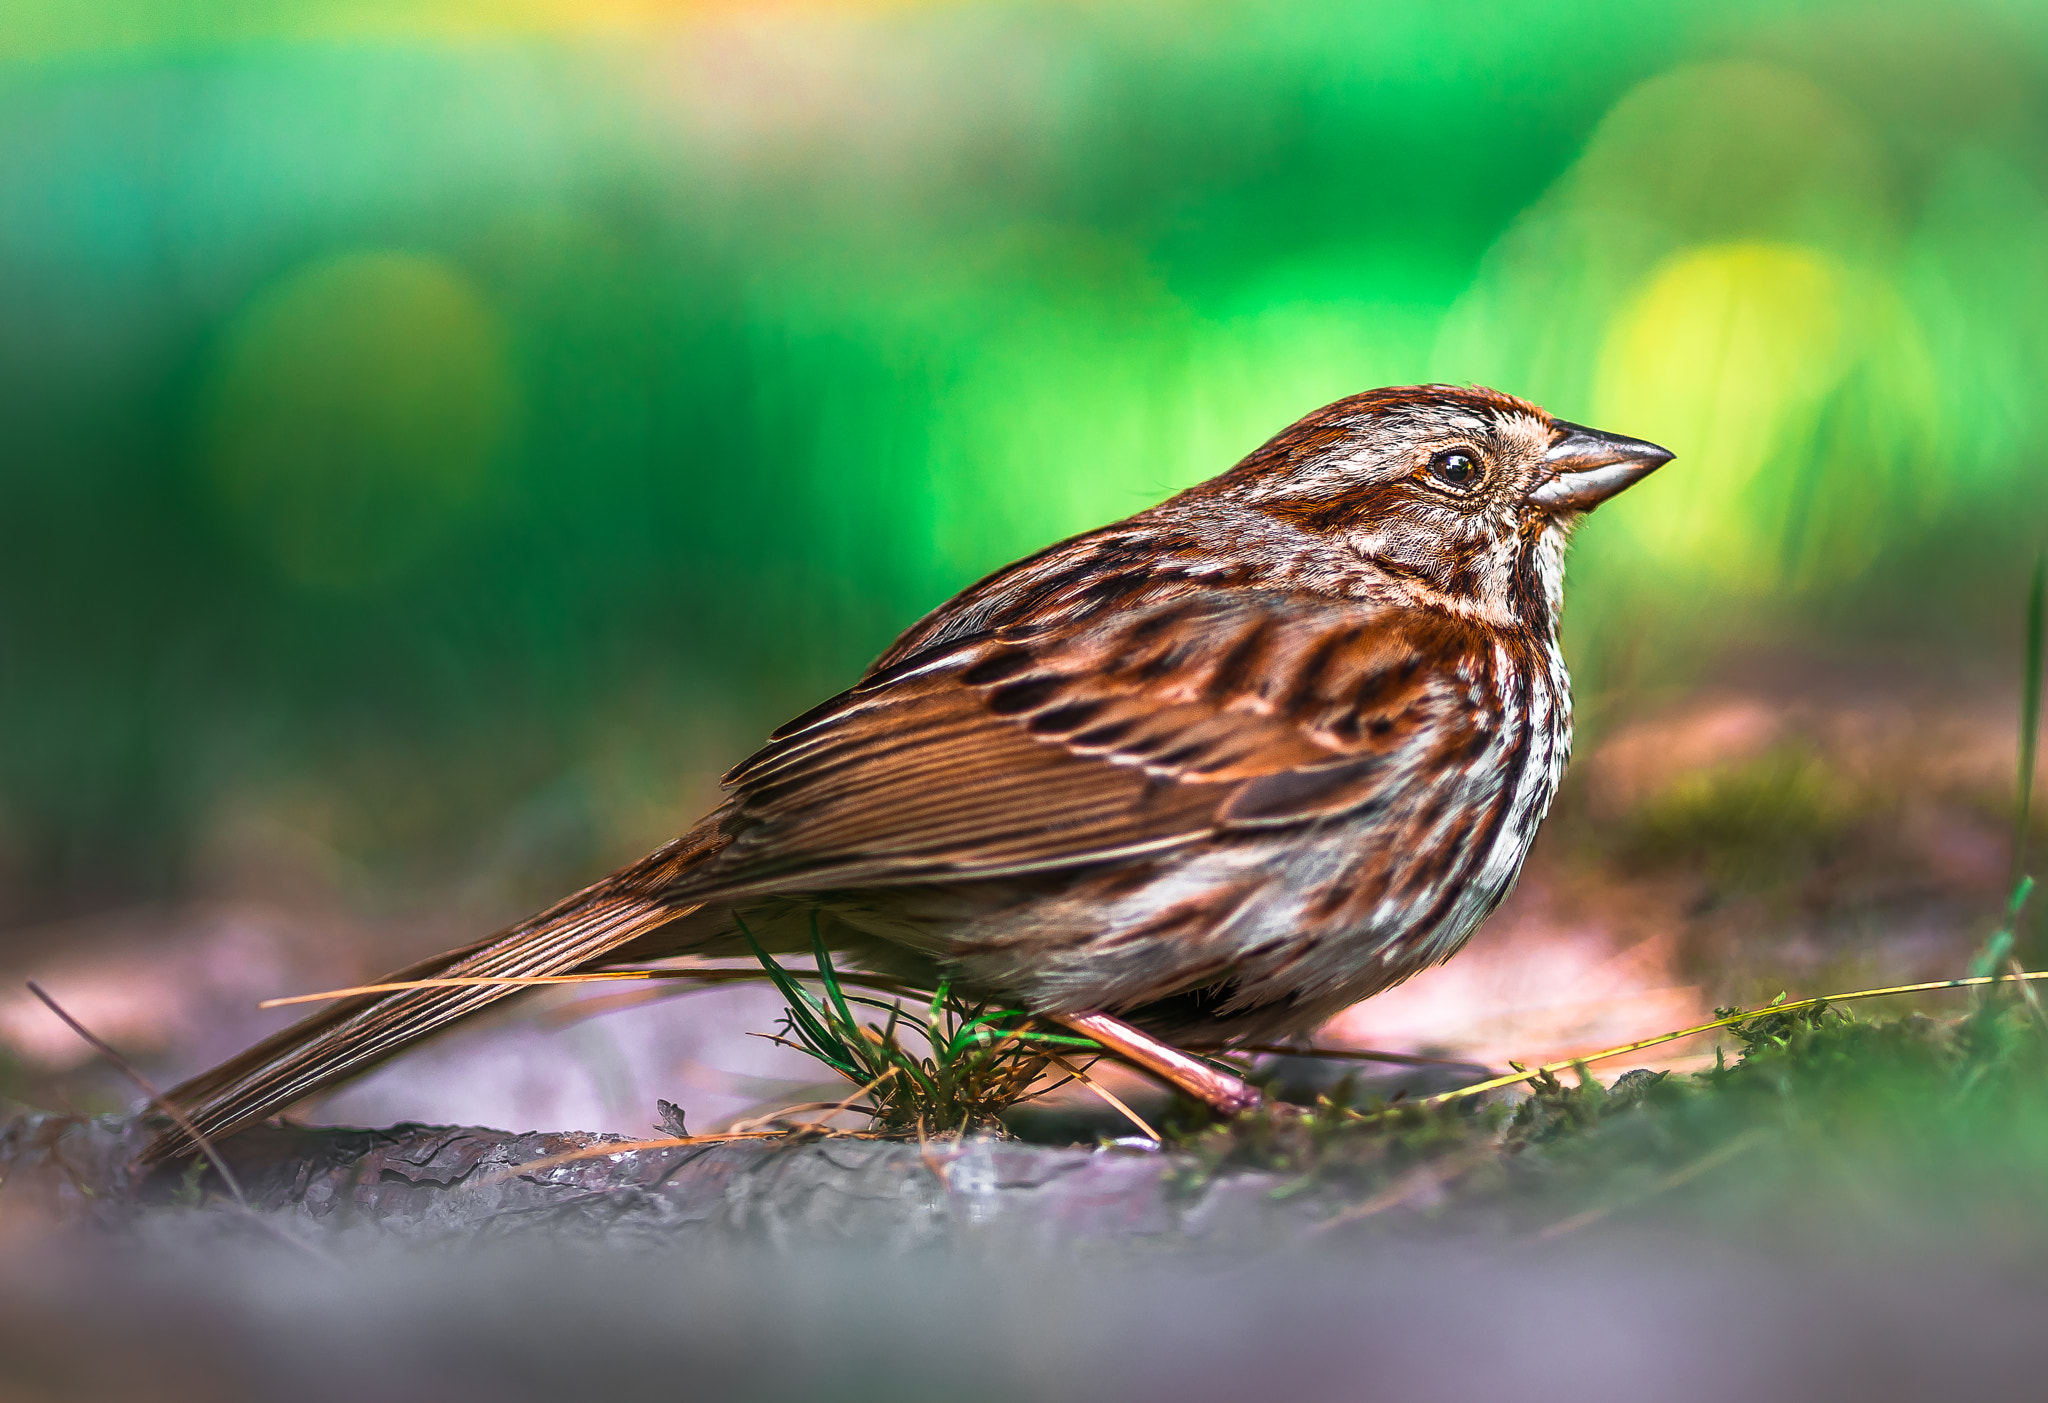 Sony a99 II + Minolta AF 100mm F2.8 Macro [New] sample photo. Song sparrow photography